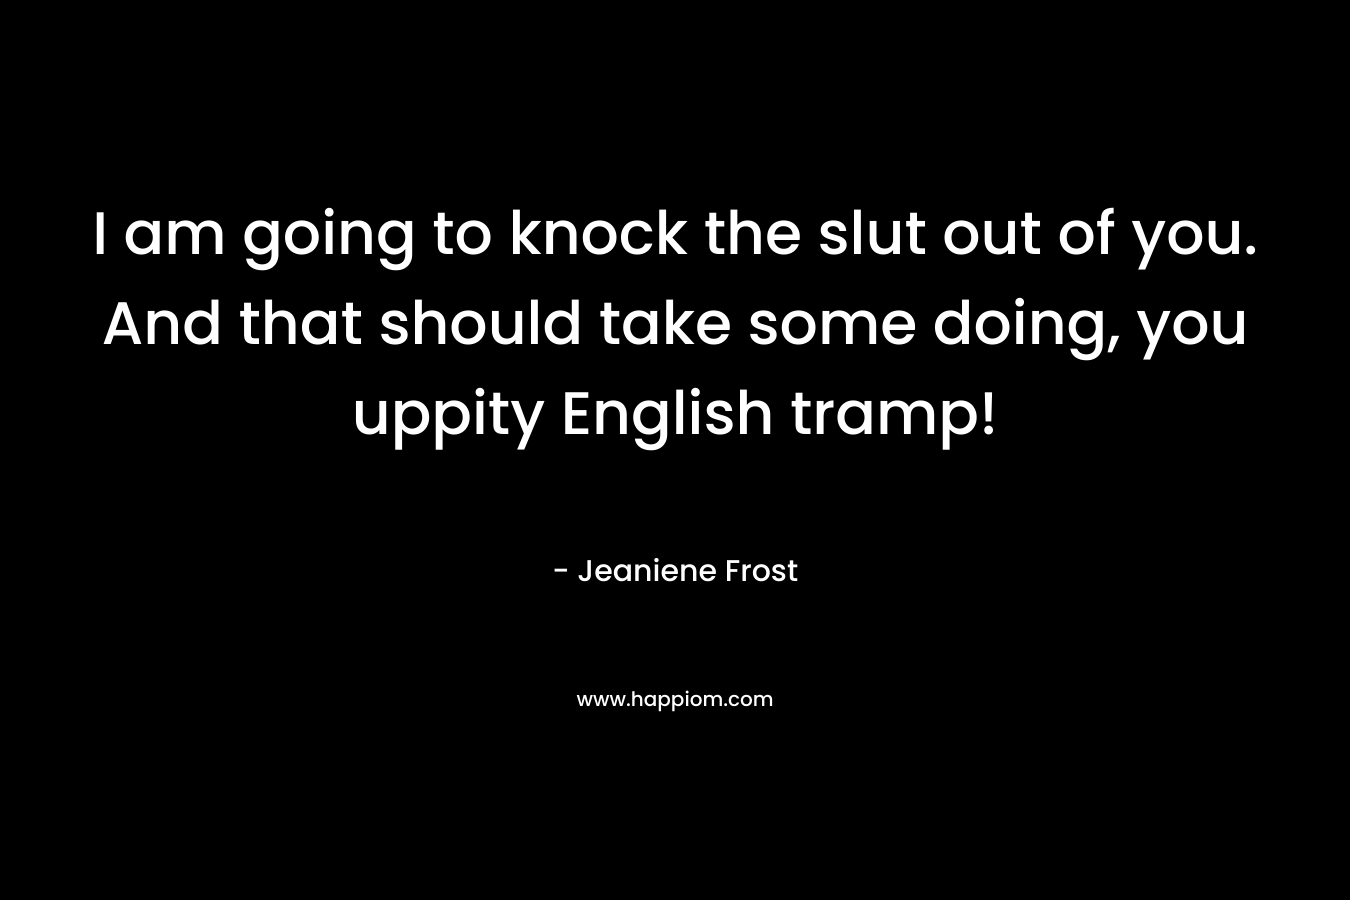 I am going to knock the slut out of you. And that should take some doing, you uppity English tramp!